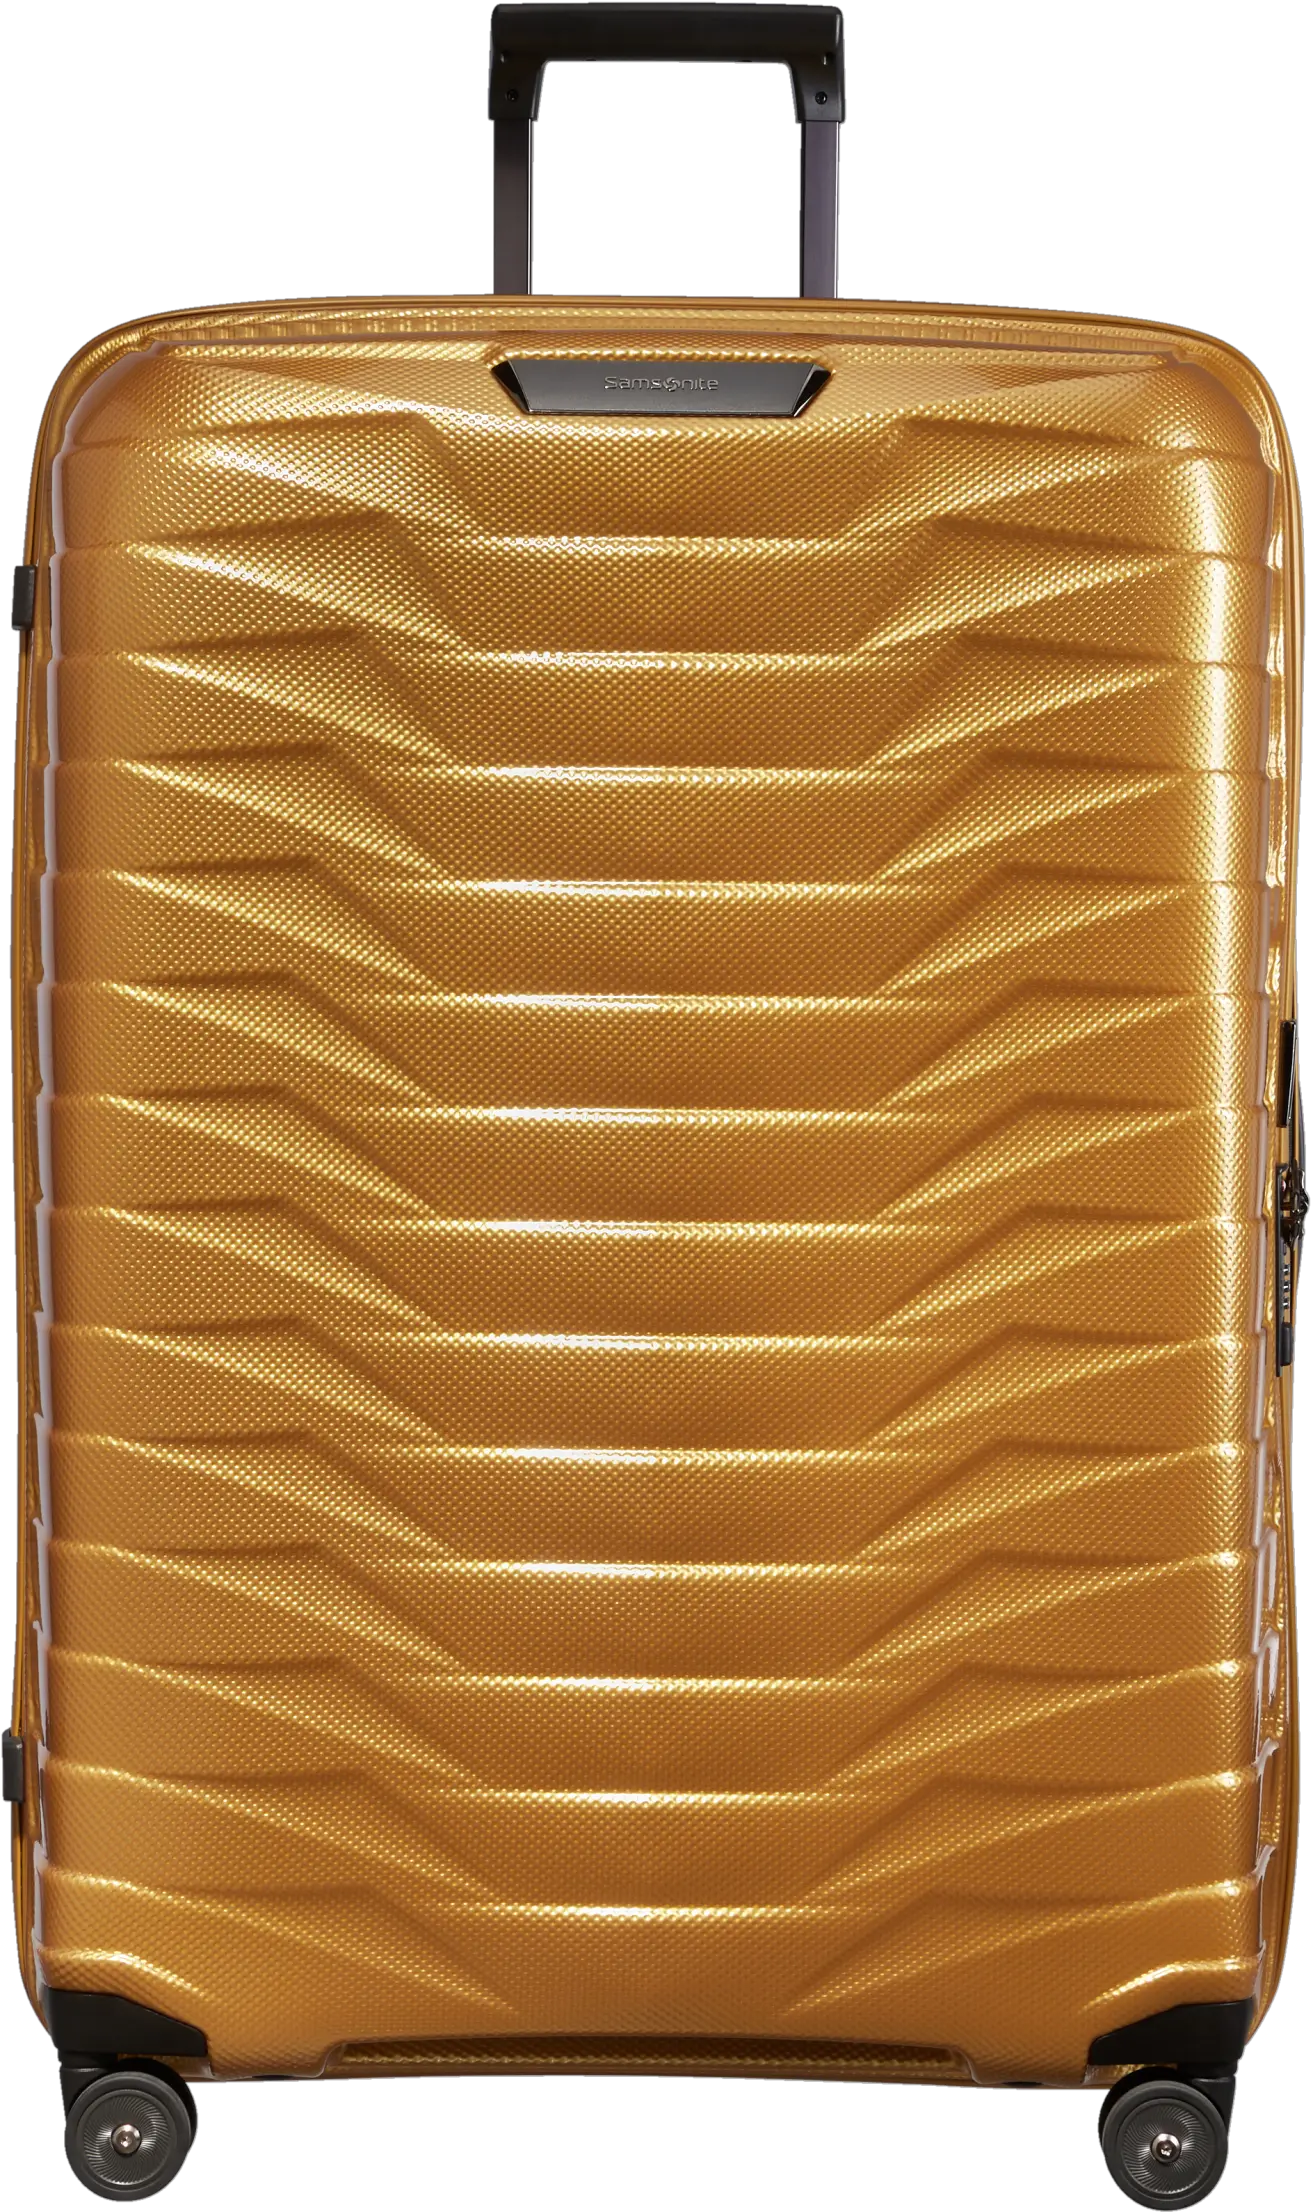 Samsonite Extra Large Suitcasequality Assuranceprotein Gold Samsonite Hand Luggage Png Silhouette Icon 8130